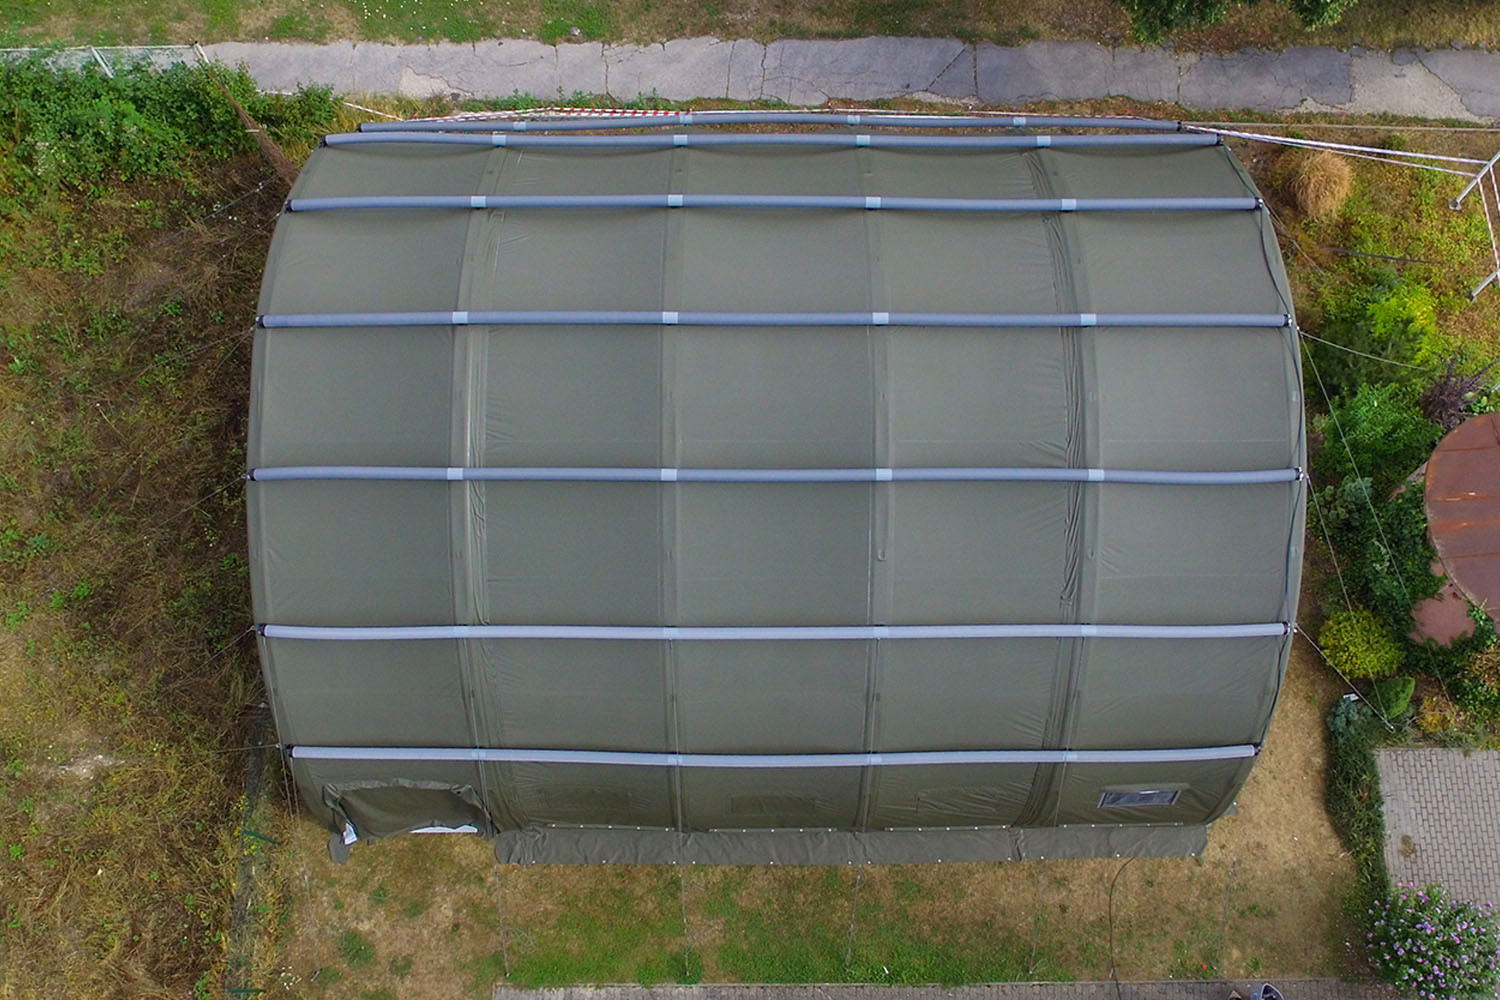 Rapid deploy patented inflatable military tent Nixus RIBS